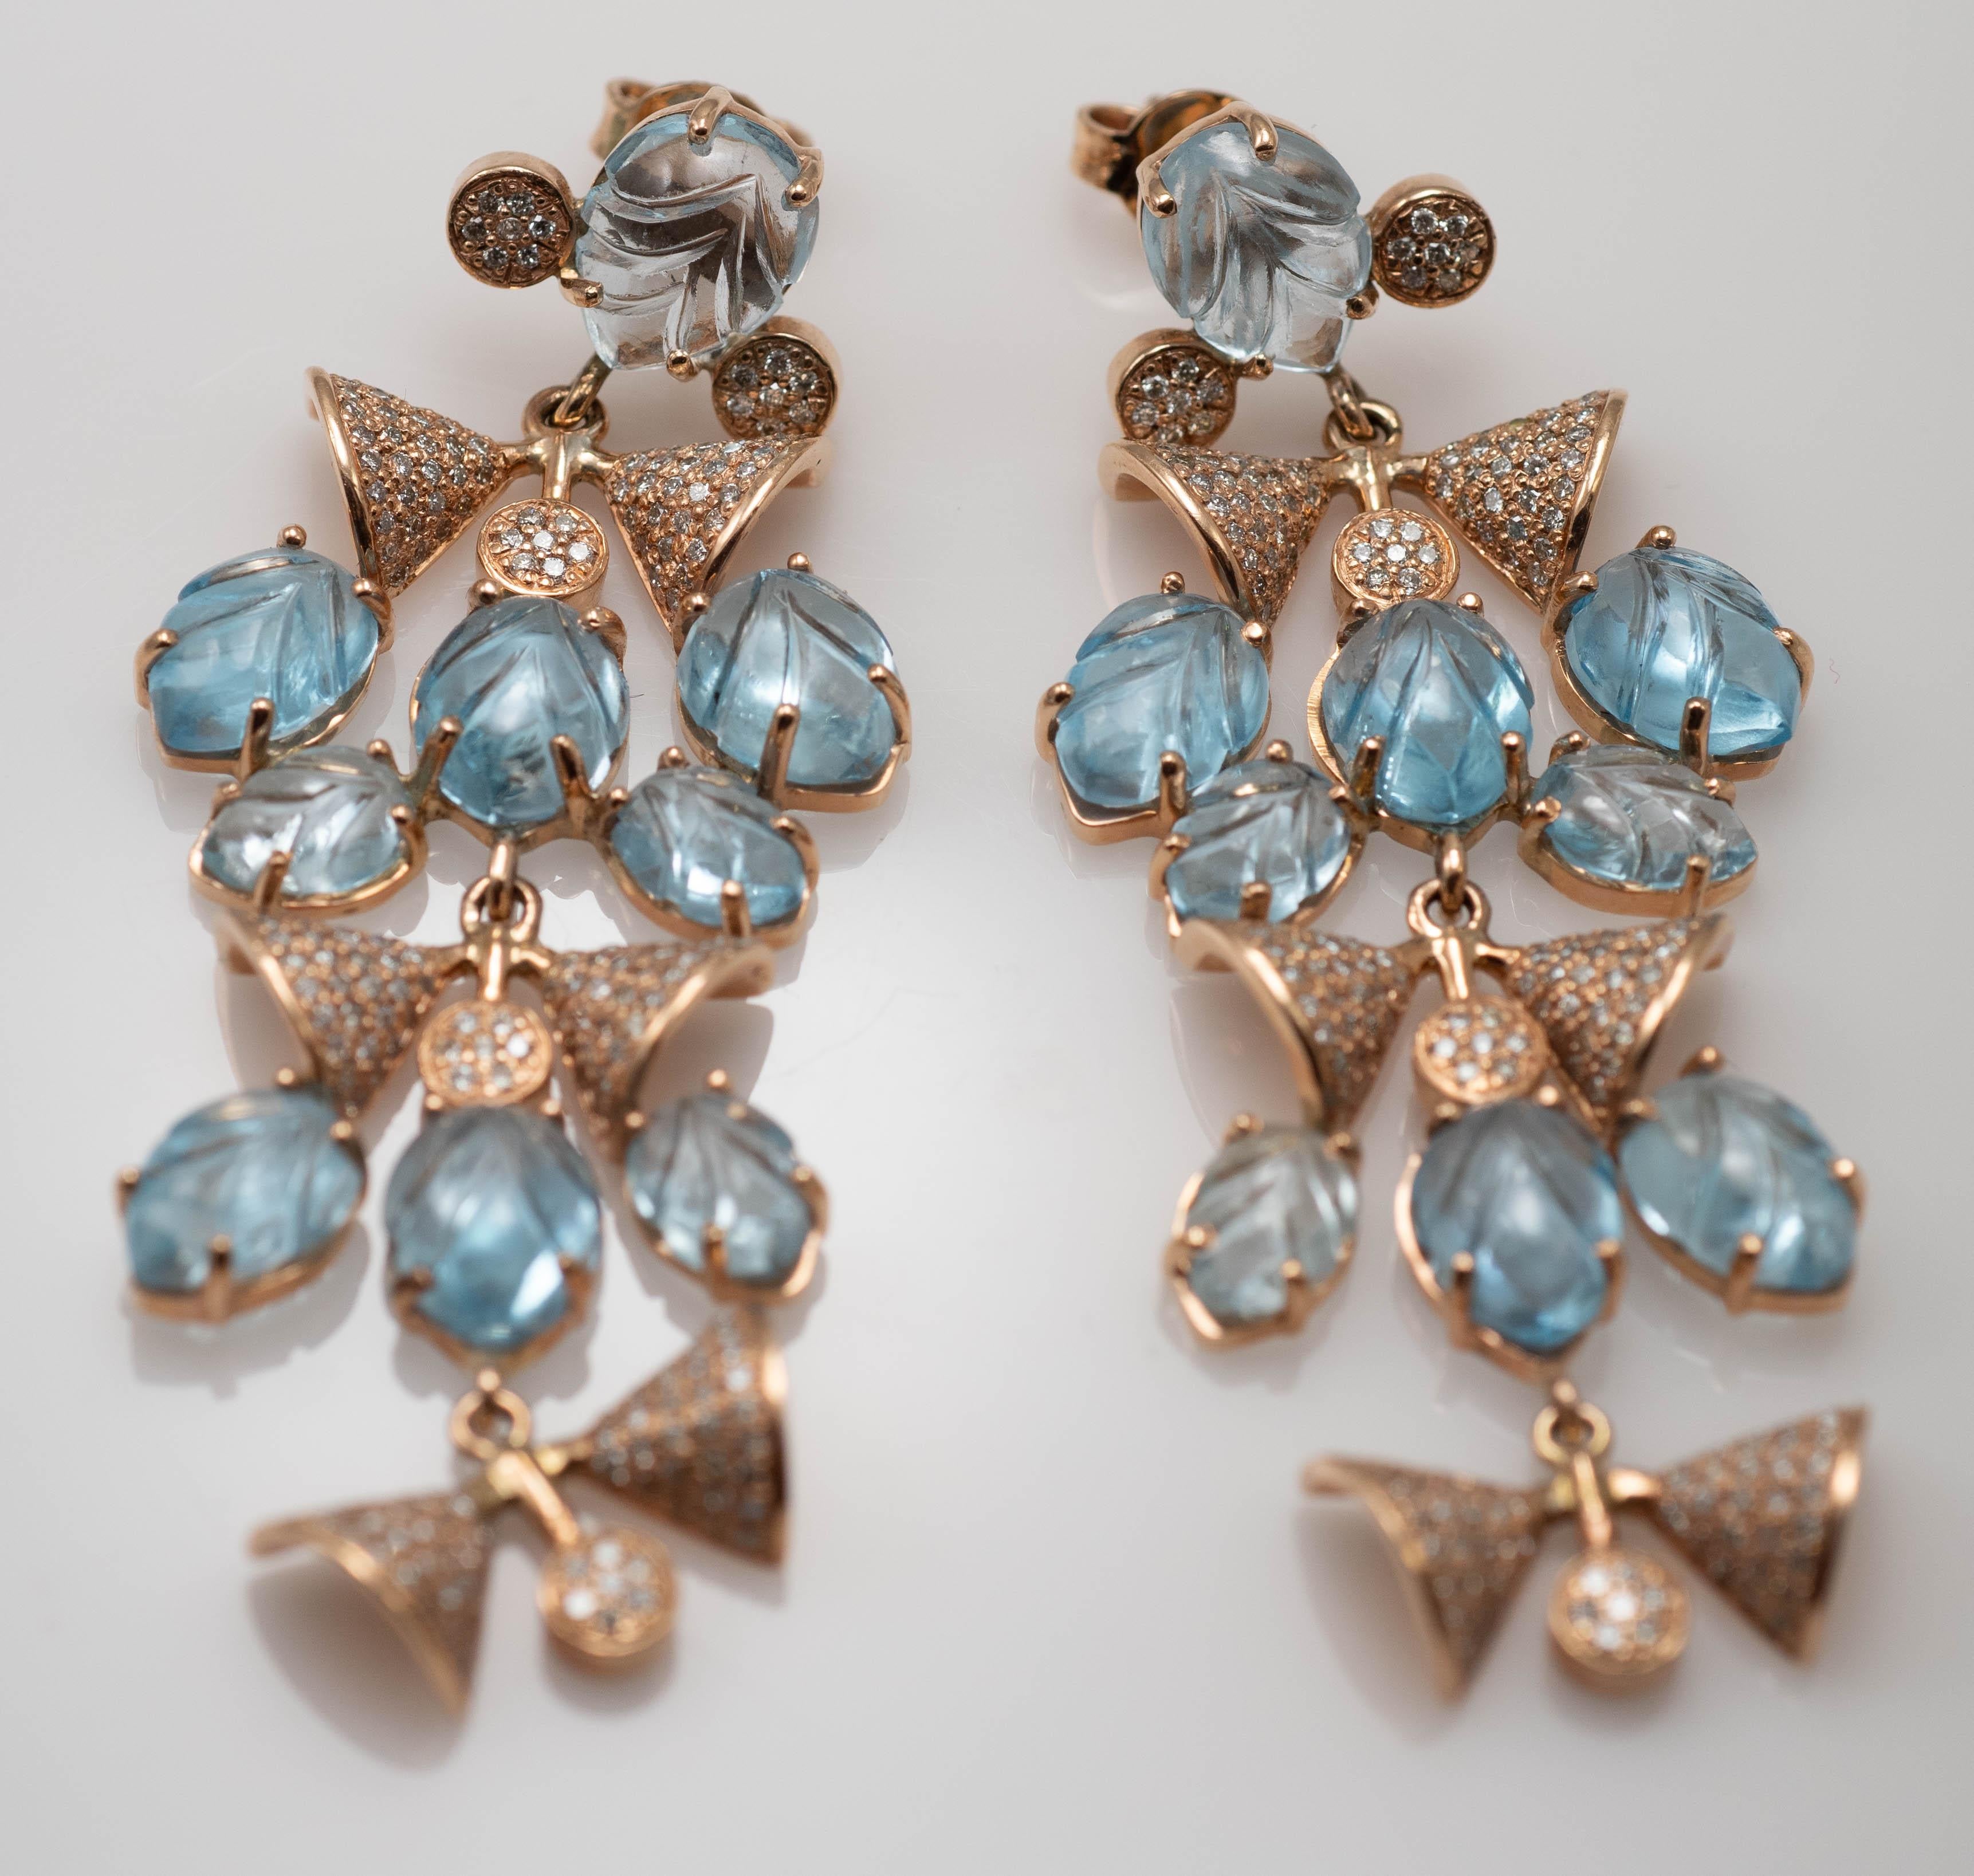 14 Karat Rose Gold Diamond And Aquamarine Post Earrings
Total Weight of 27.50 Grams
Total of 16.50 Carats Round Brilliant Diamonds Mounted In Pave Setting 
Pear Shaped Carved Aquamarine Mounted In Prong Setting
They Measure 2.5 Inches In Length And